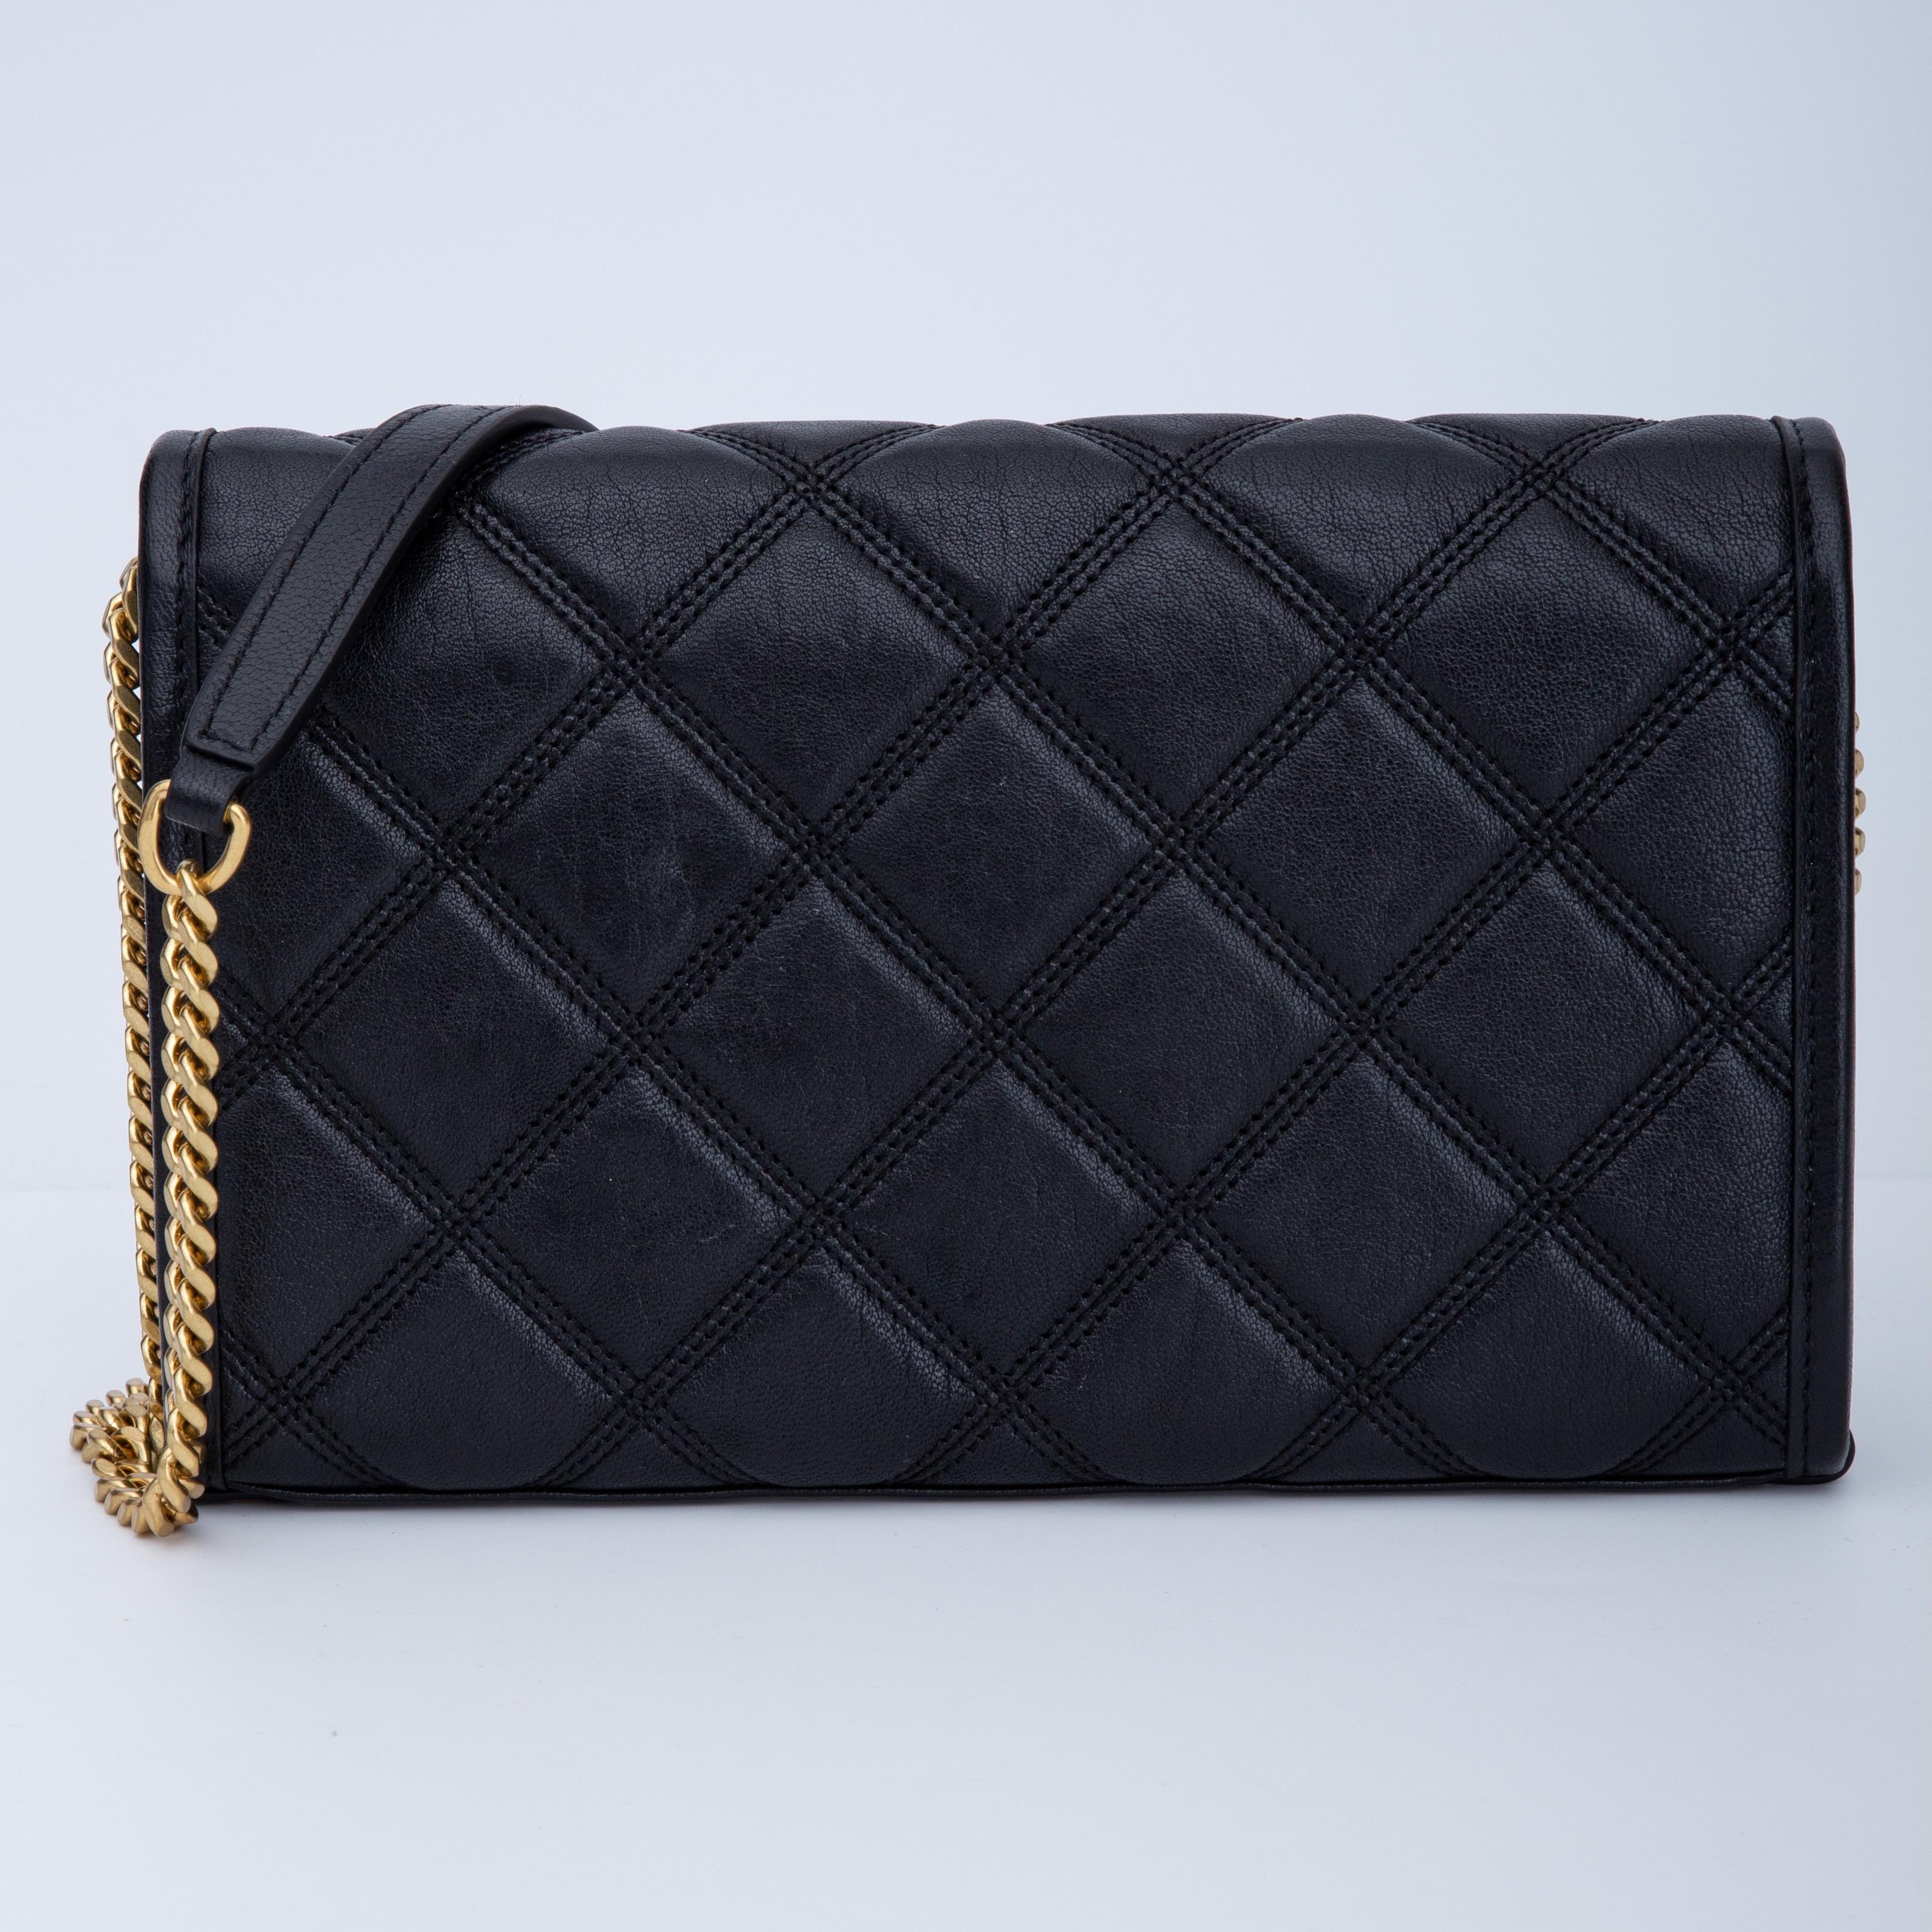 This Becky Mini Chain bag features gold tone hardware, grosgrain lining, a magnetic snap closure and an interior zip pocket. Made in Italy of 100% Lambskin. It also has an adjustable chain strap.

COLOR: Black
MATERIAL: Calfskin leather
MEASURES: H